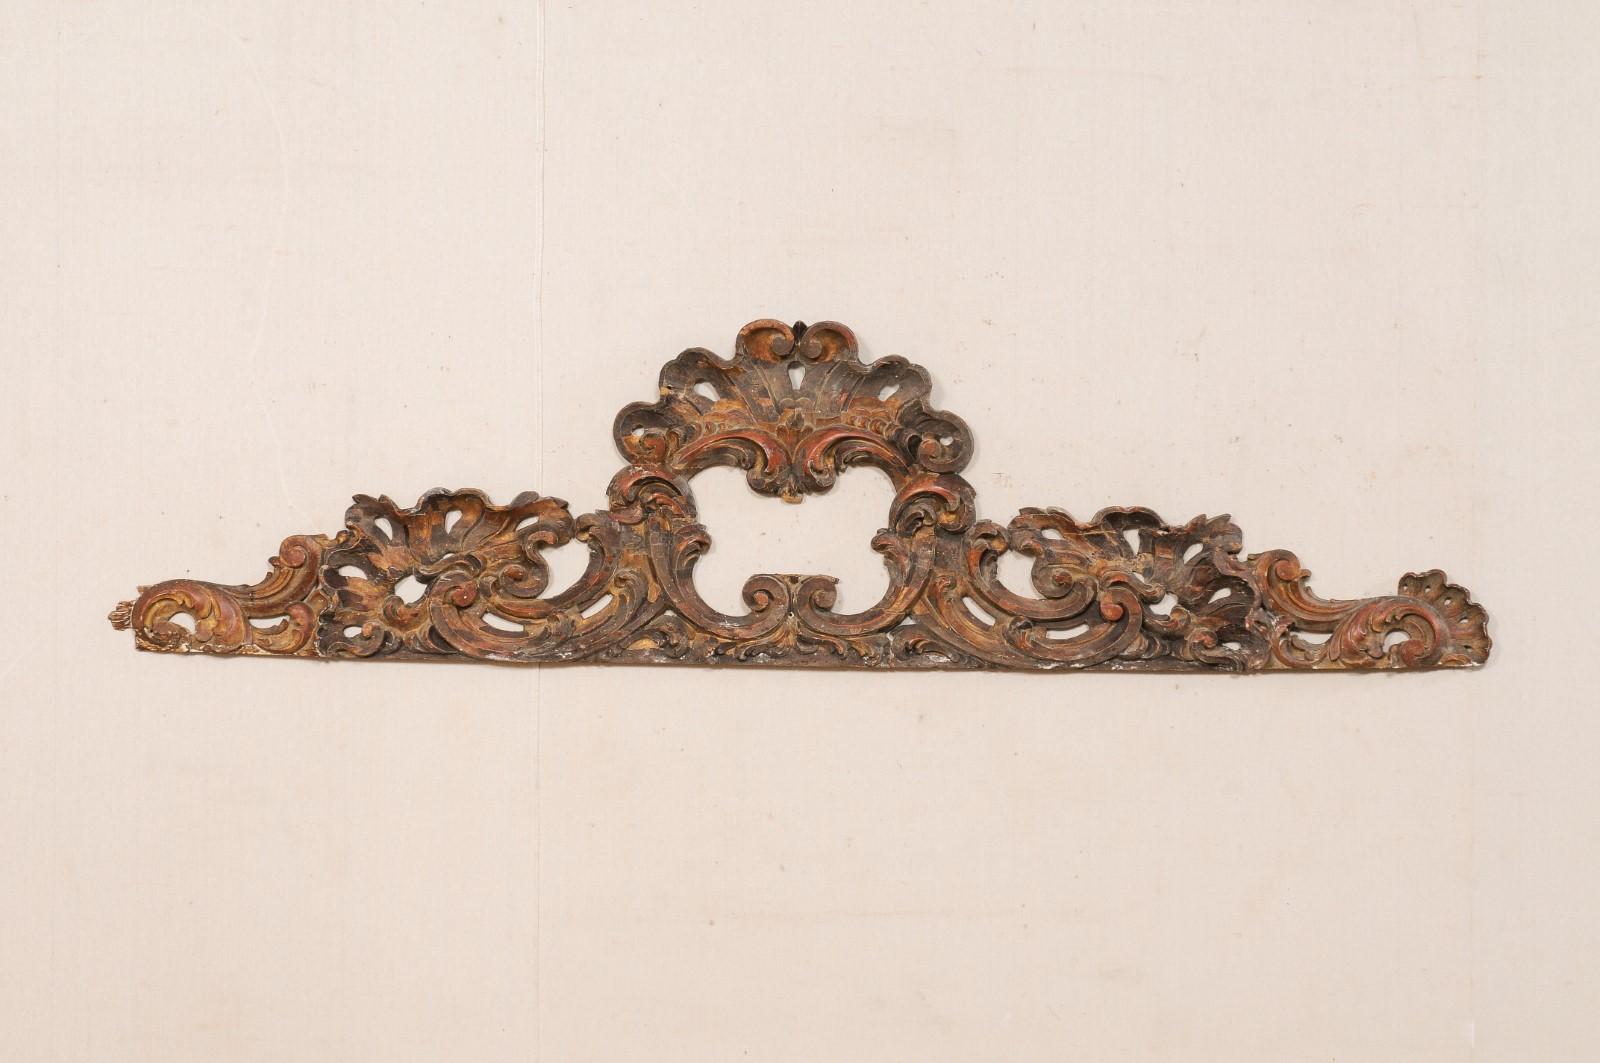 An Italian carved-wood pediment fragment, with its original finish, from the turn of the 18th and 19th century. This antique wall ornament from Italy, with it's horizontal span of over 6.75 feet in length, has been hand-carved in a swirling